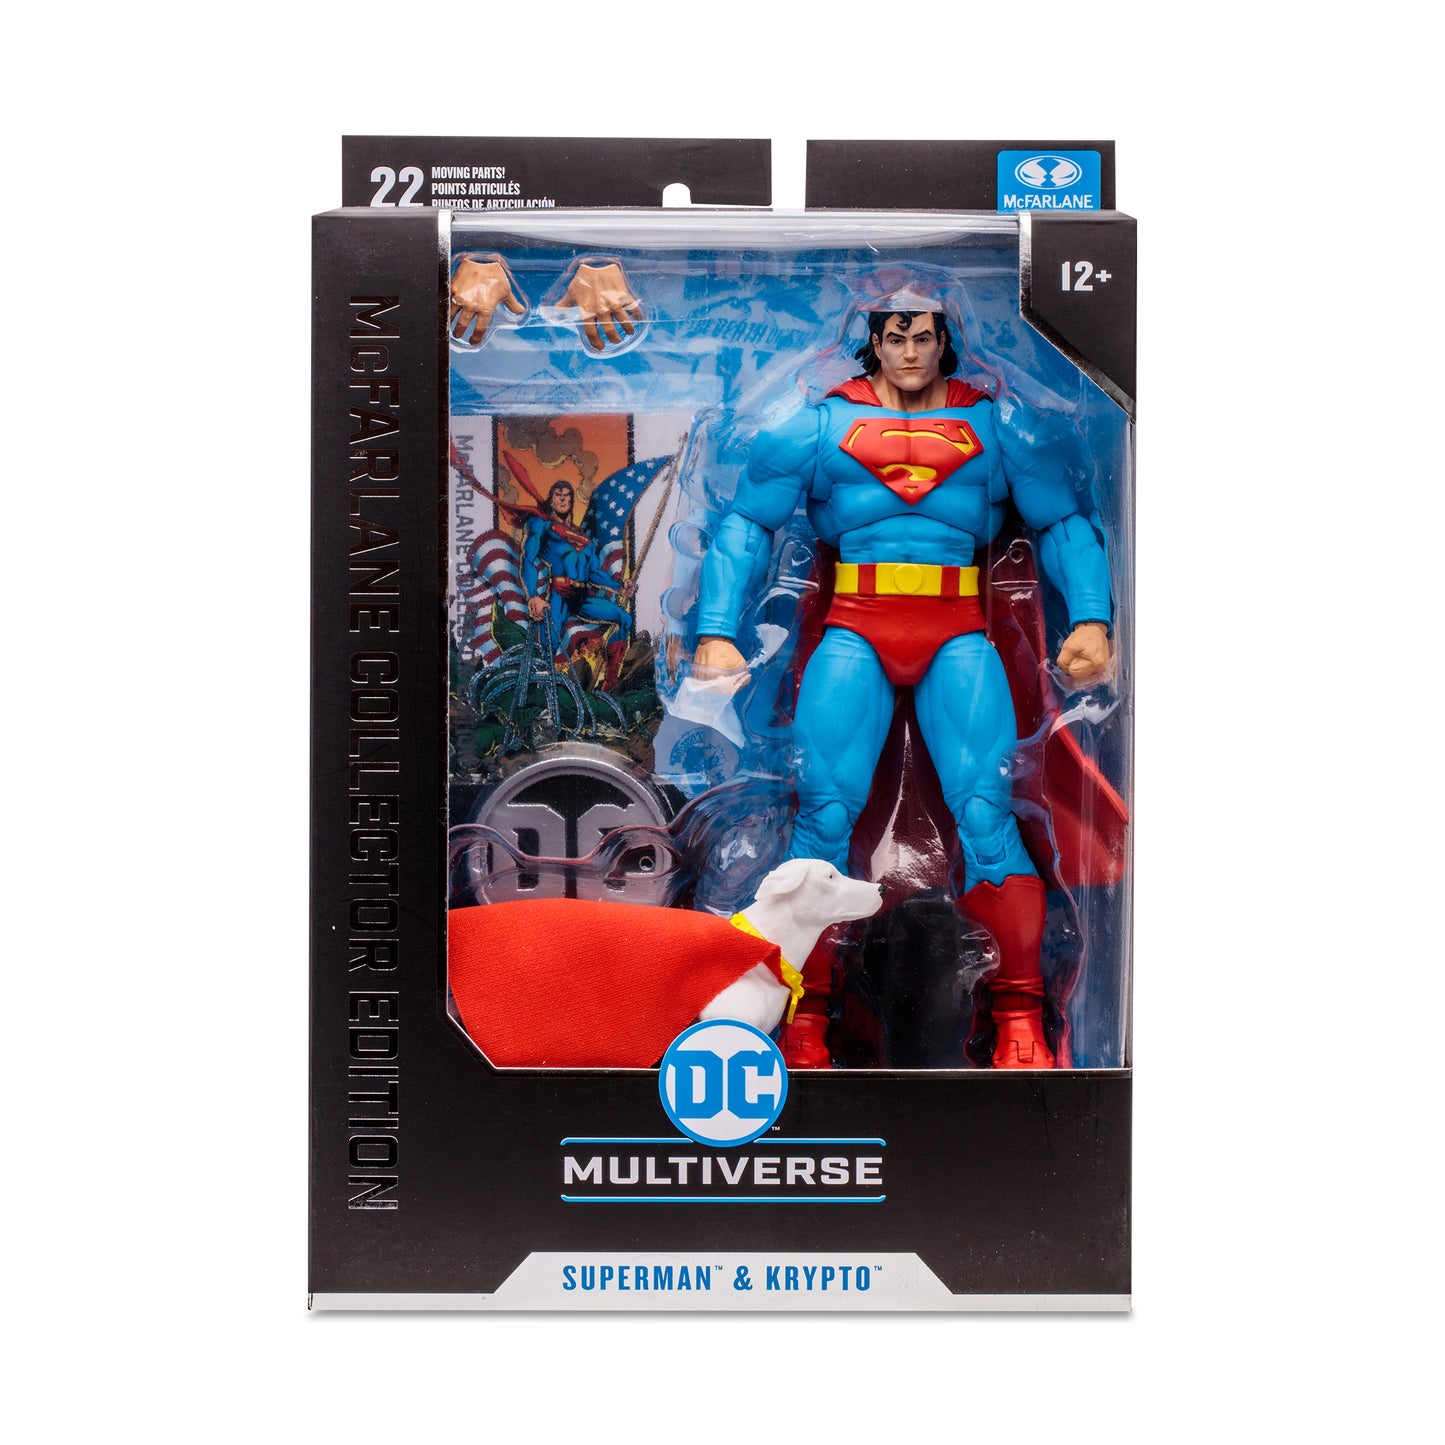 DC McFarlane Collector Edition Wave 3 7in Action Figure